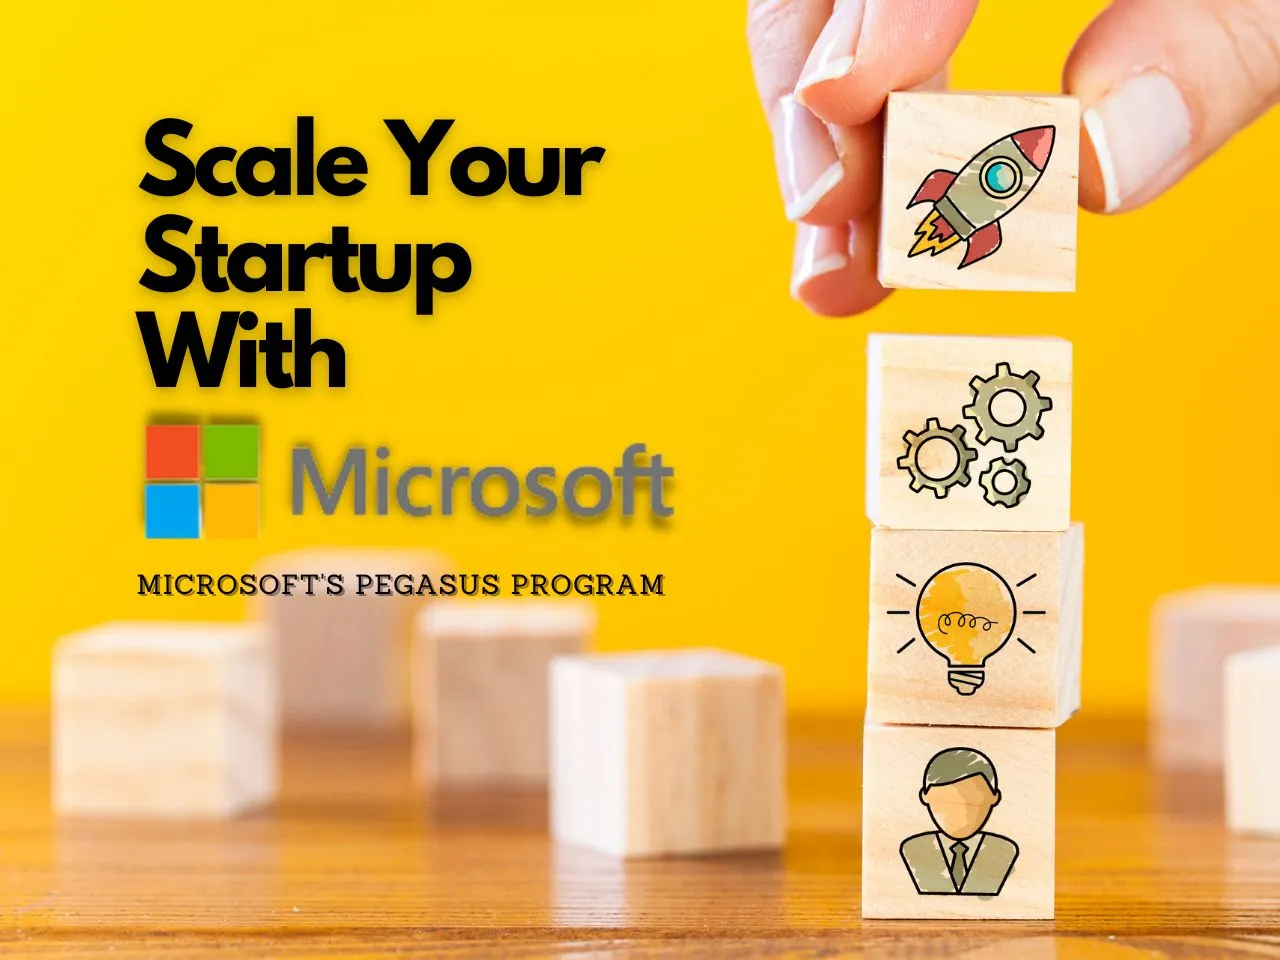 Microsoft's Pegasus Program: The Ultimate Boost for Your Startup